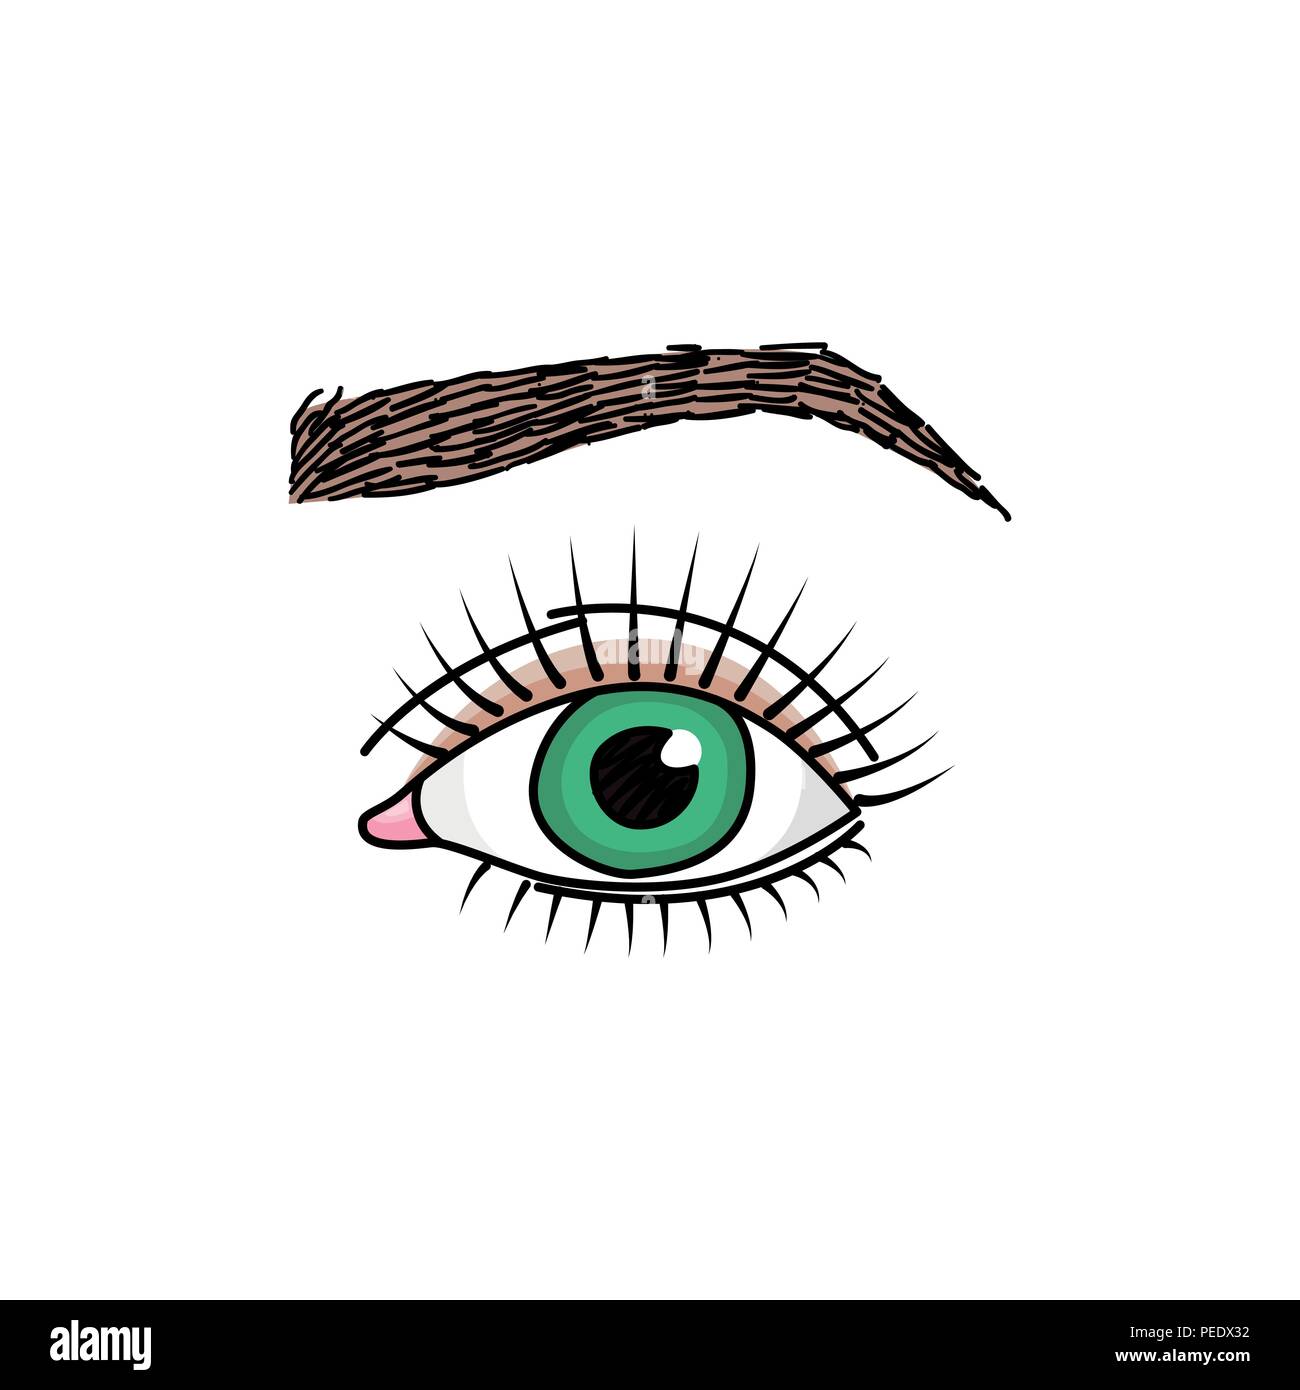 Doodle illustration with green eye and brow Stock Vector